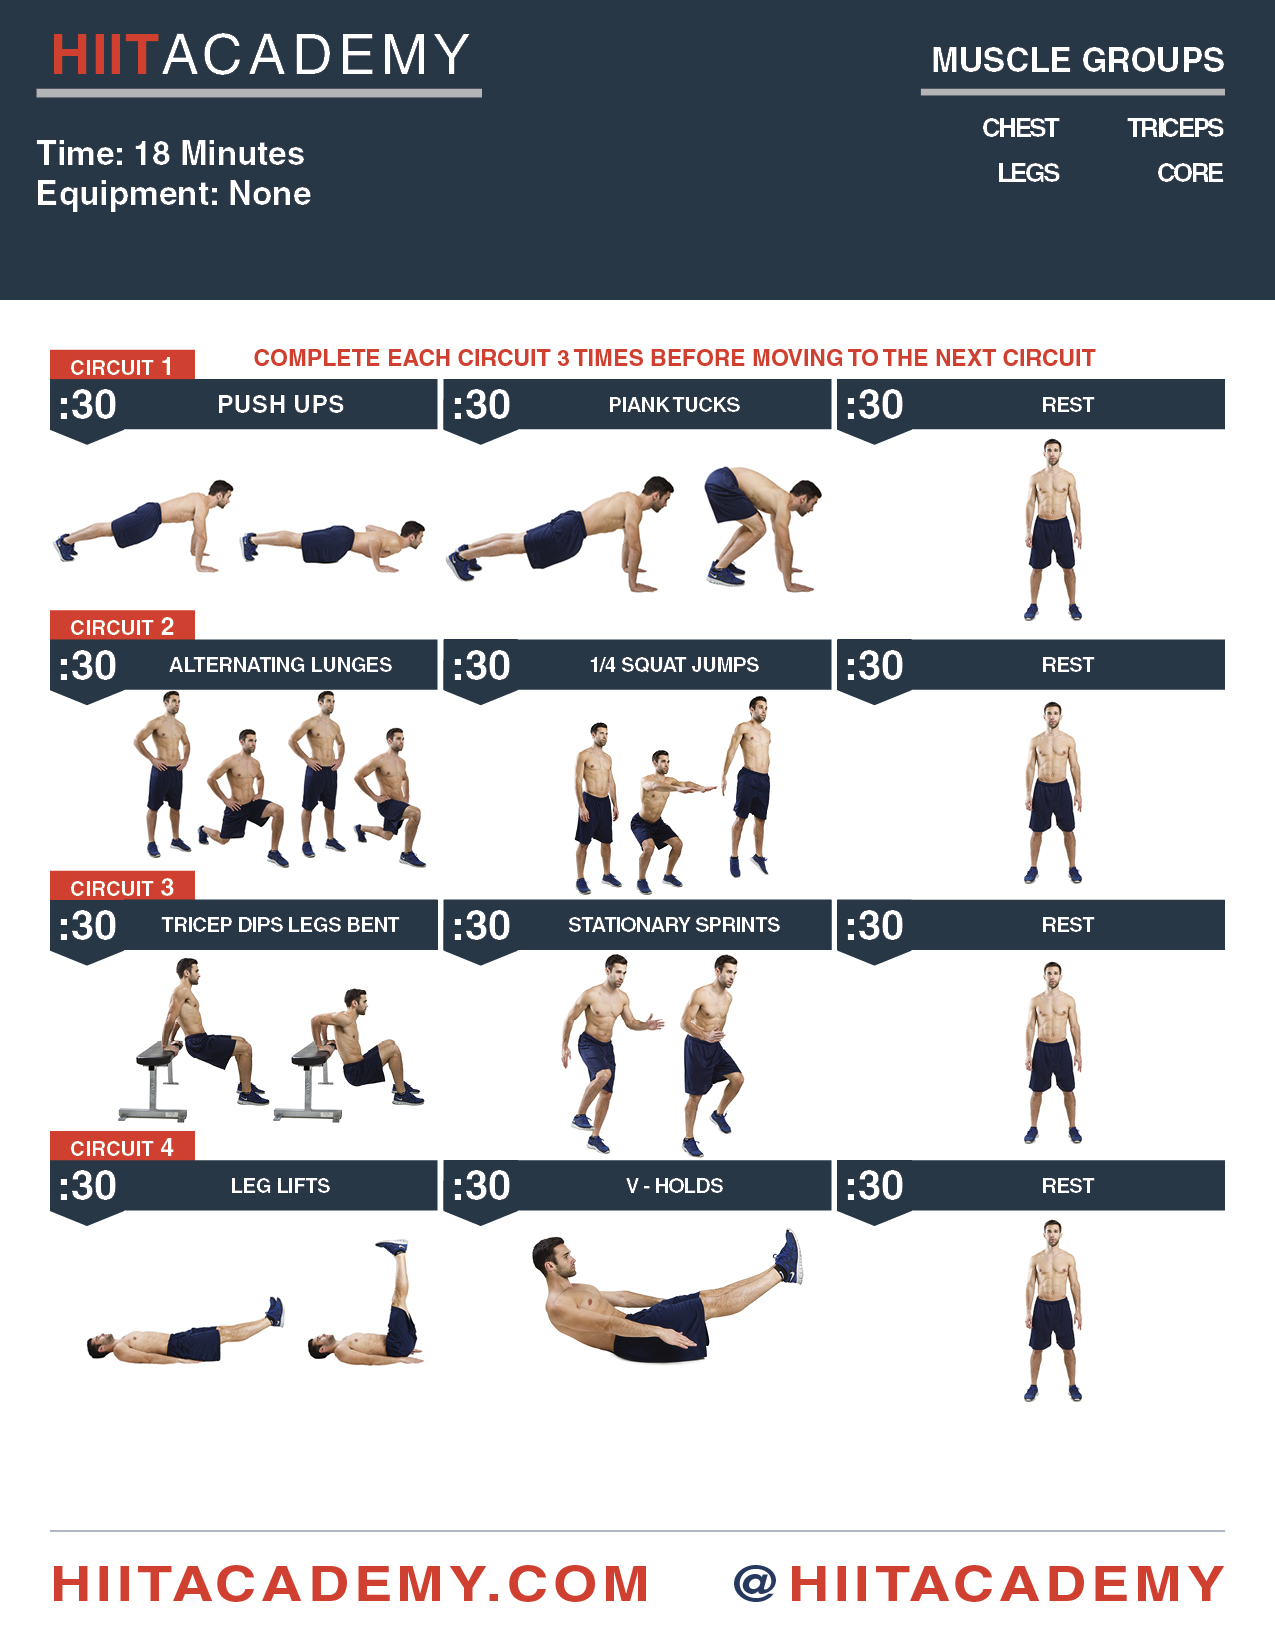 total-bodyweight-hiit-workout-hiit-academy-hiit-workouts-hiit